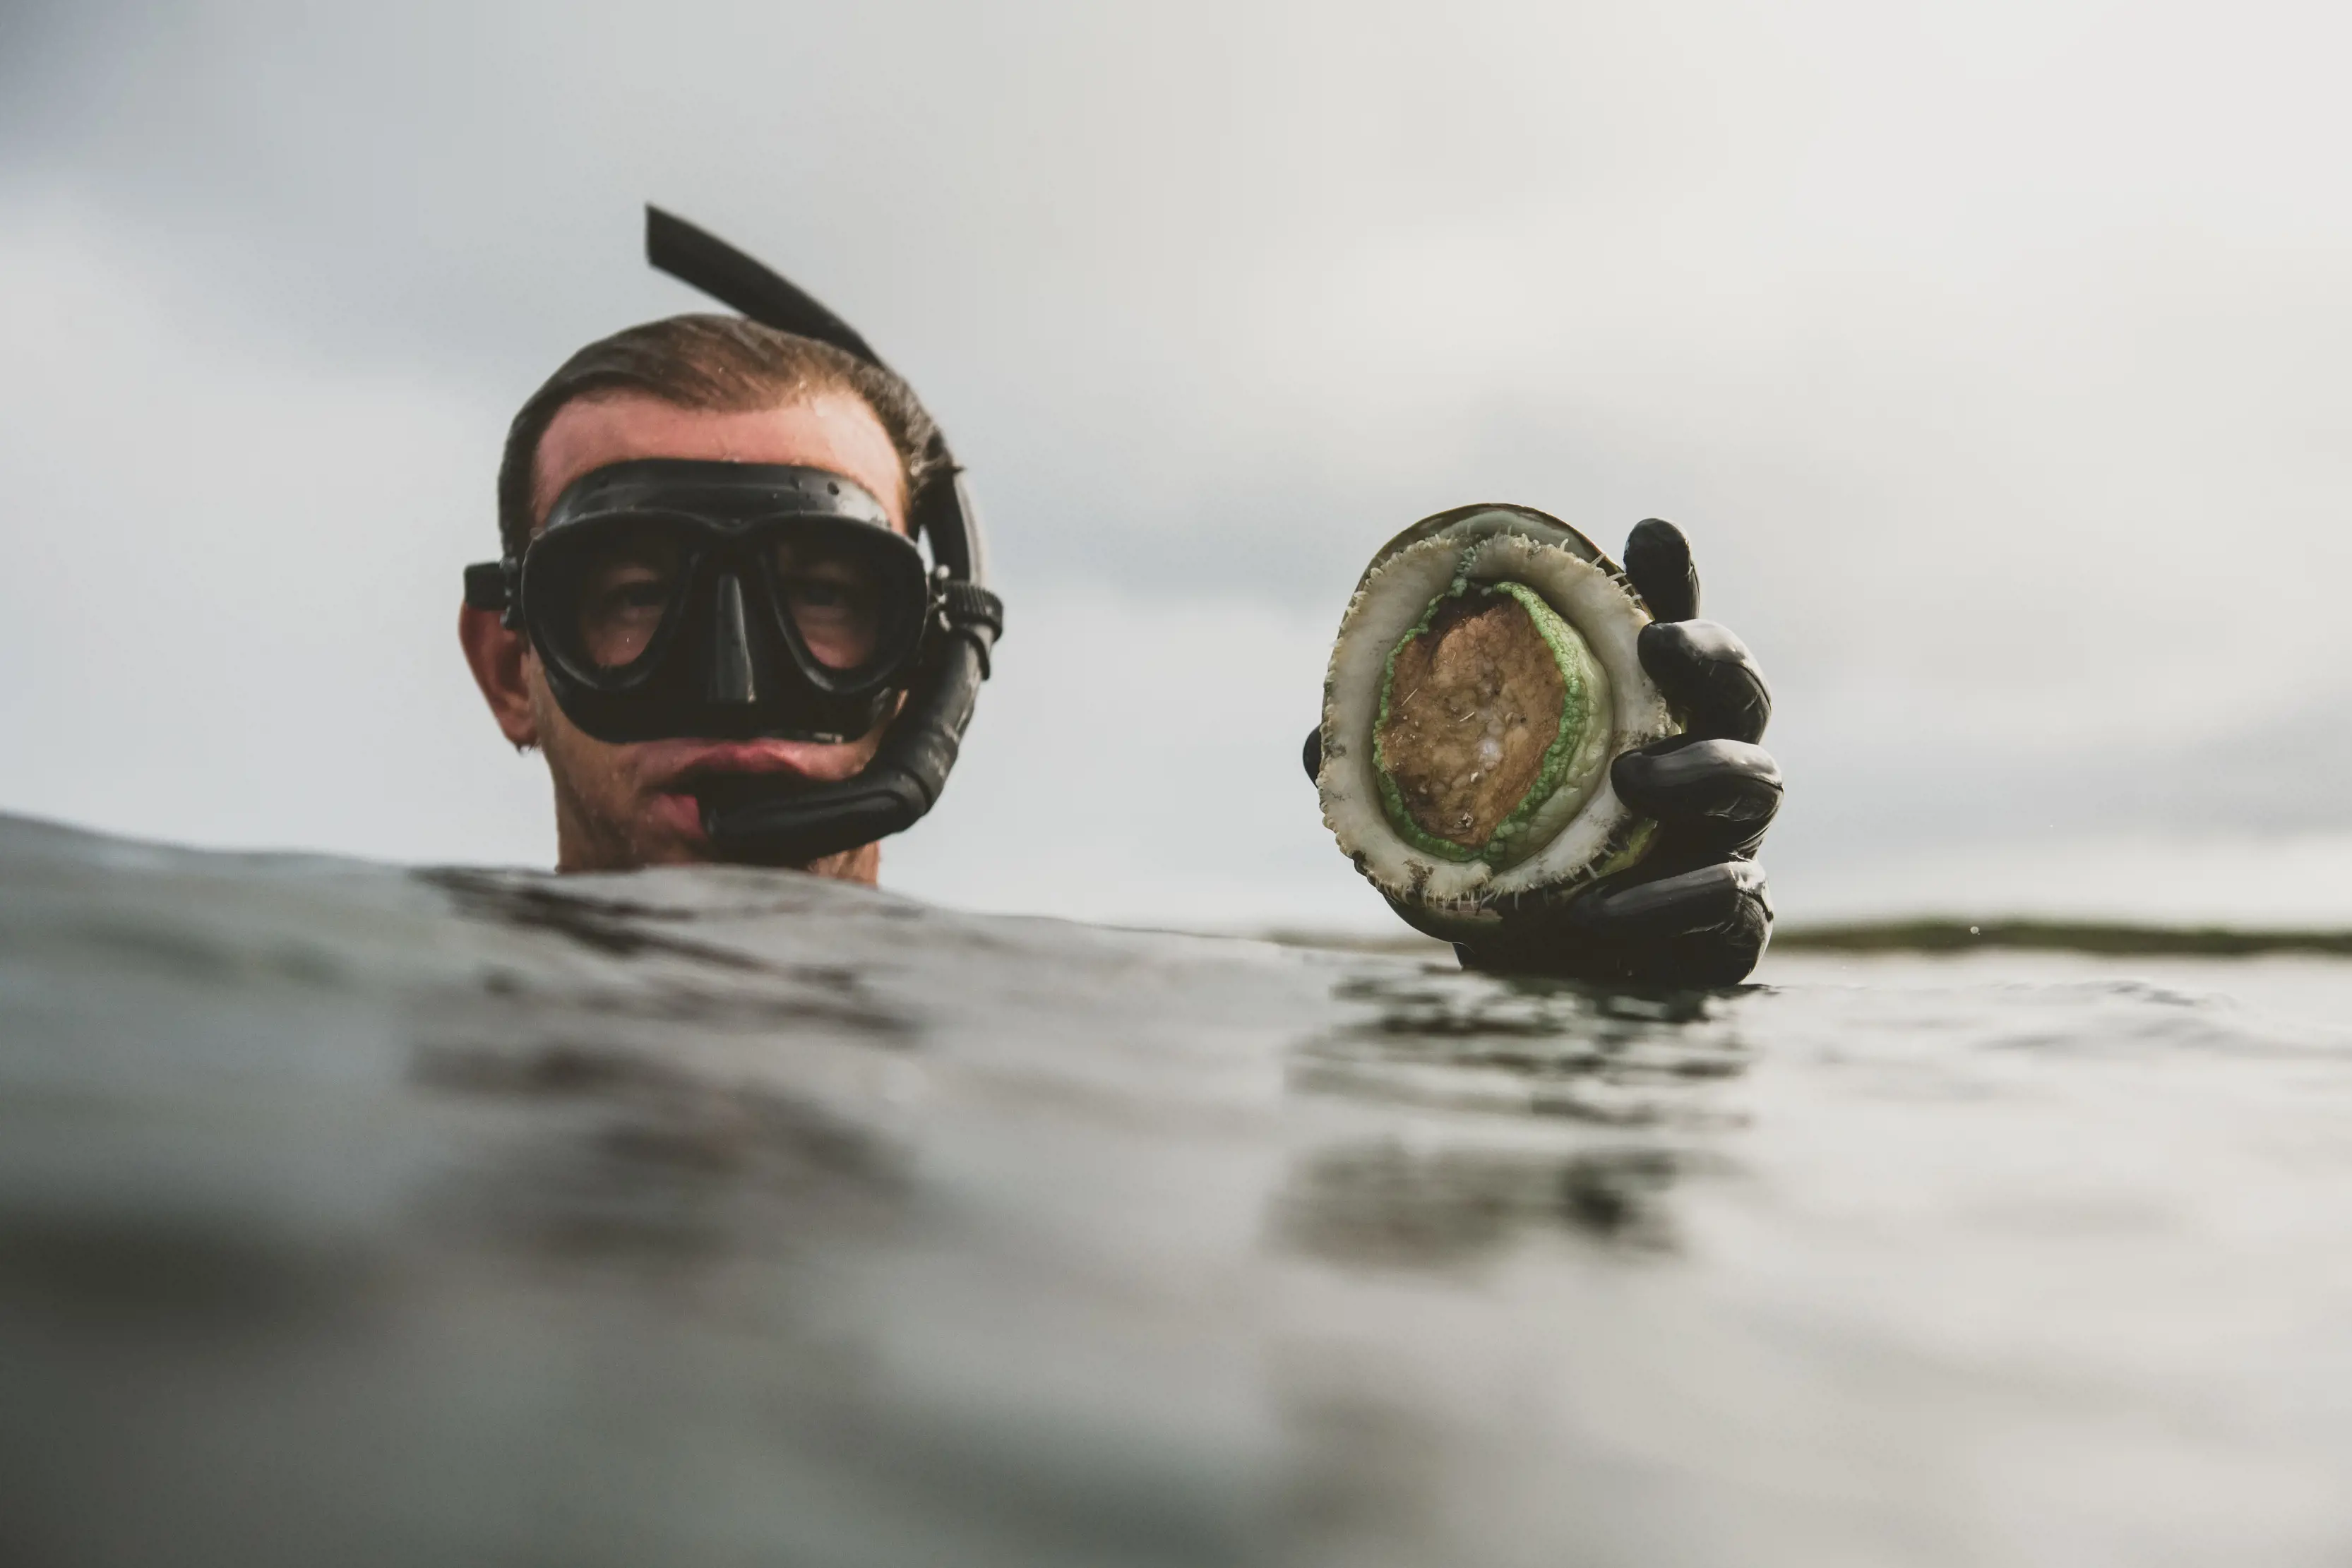 Diver holding up an Abalone in the ocean, Image taken in the ocean.